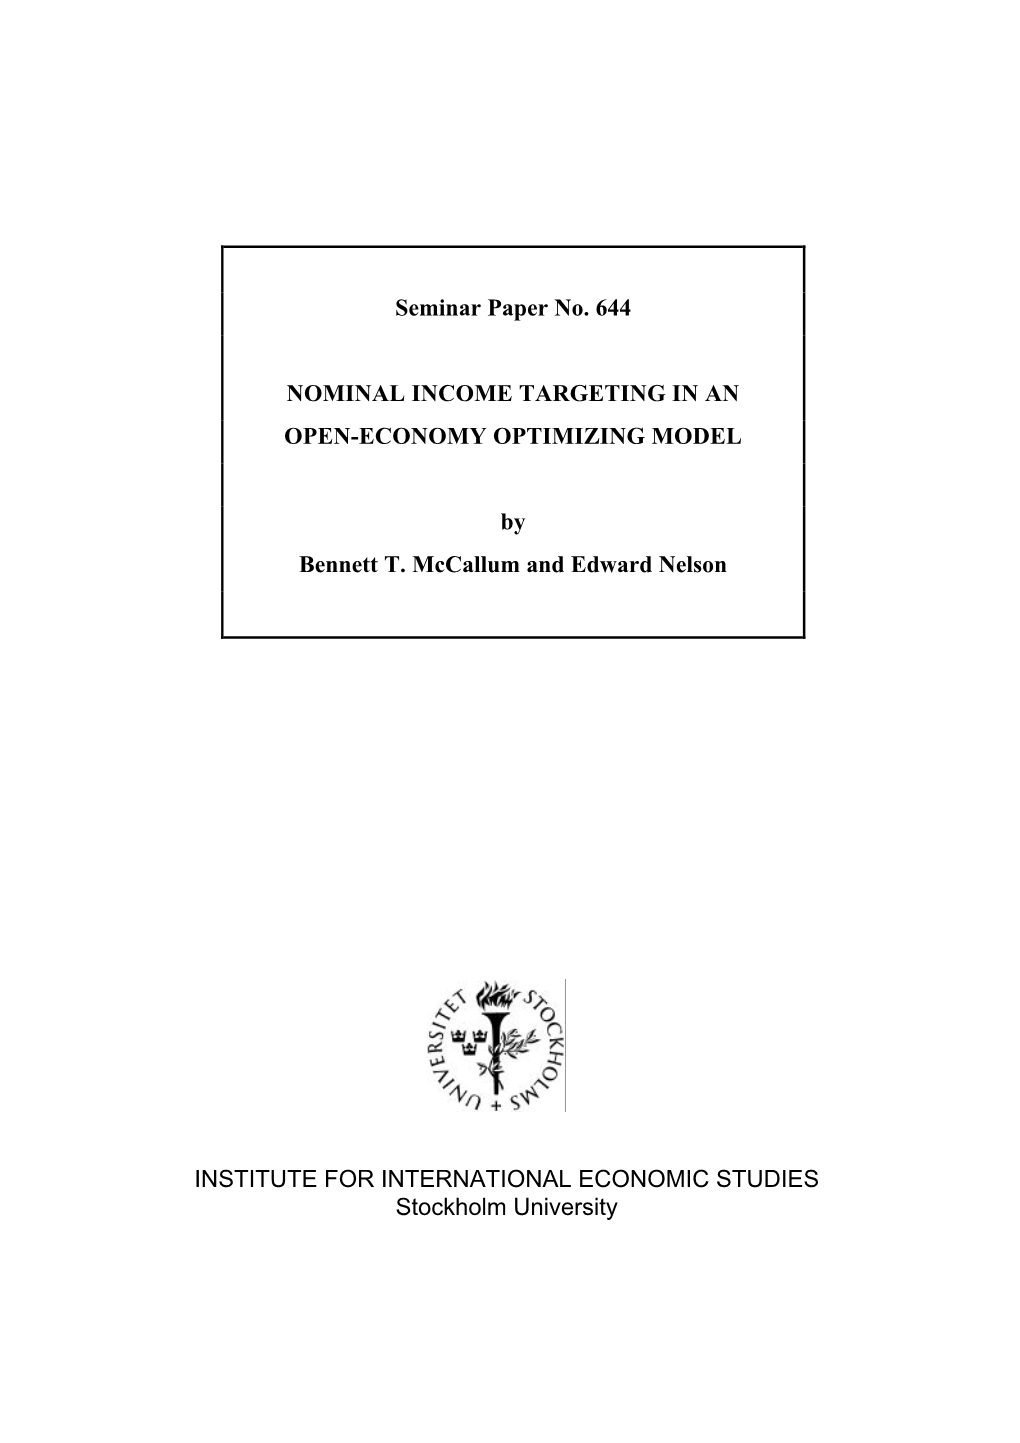 Seminar Paper No. 644 NOMINAL INCOME TARGETING in an OPEN